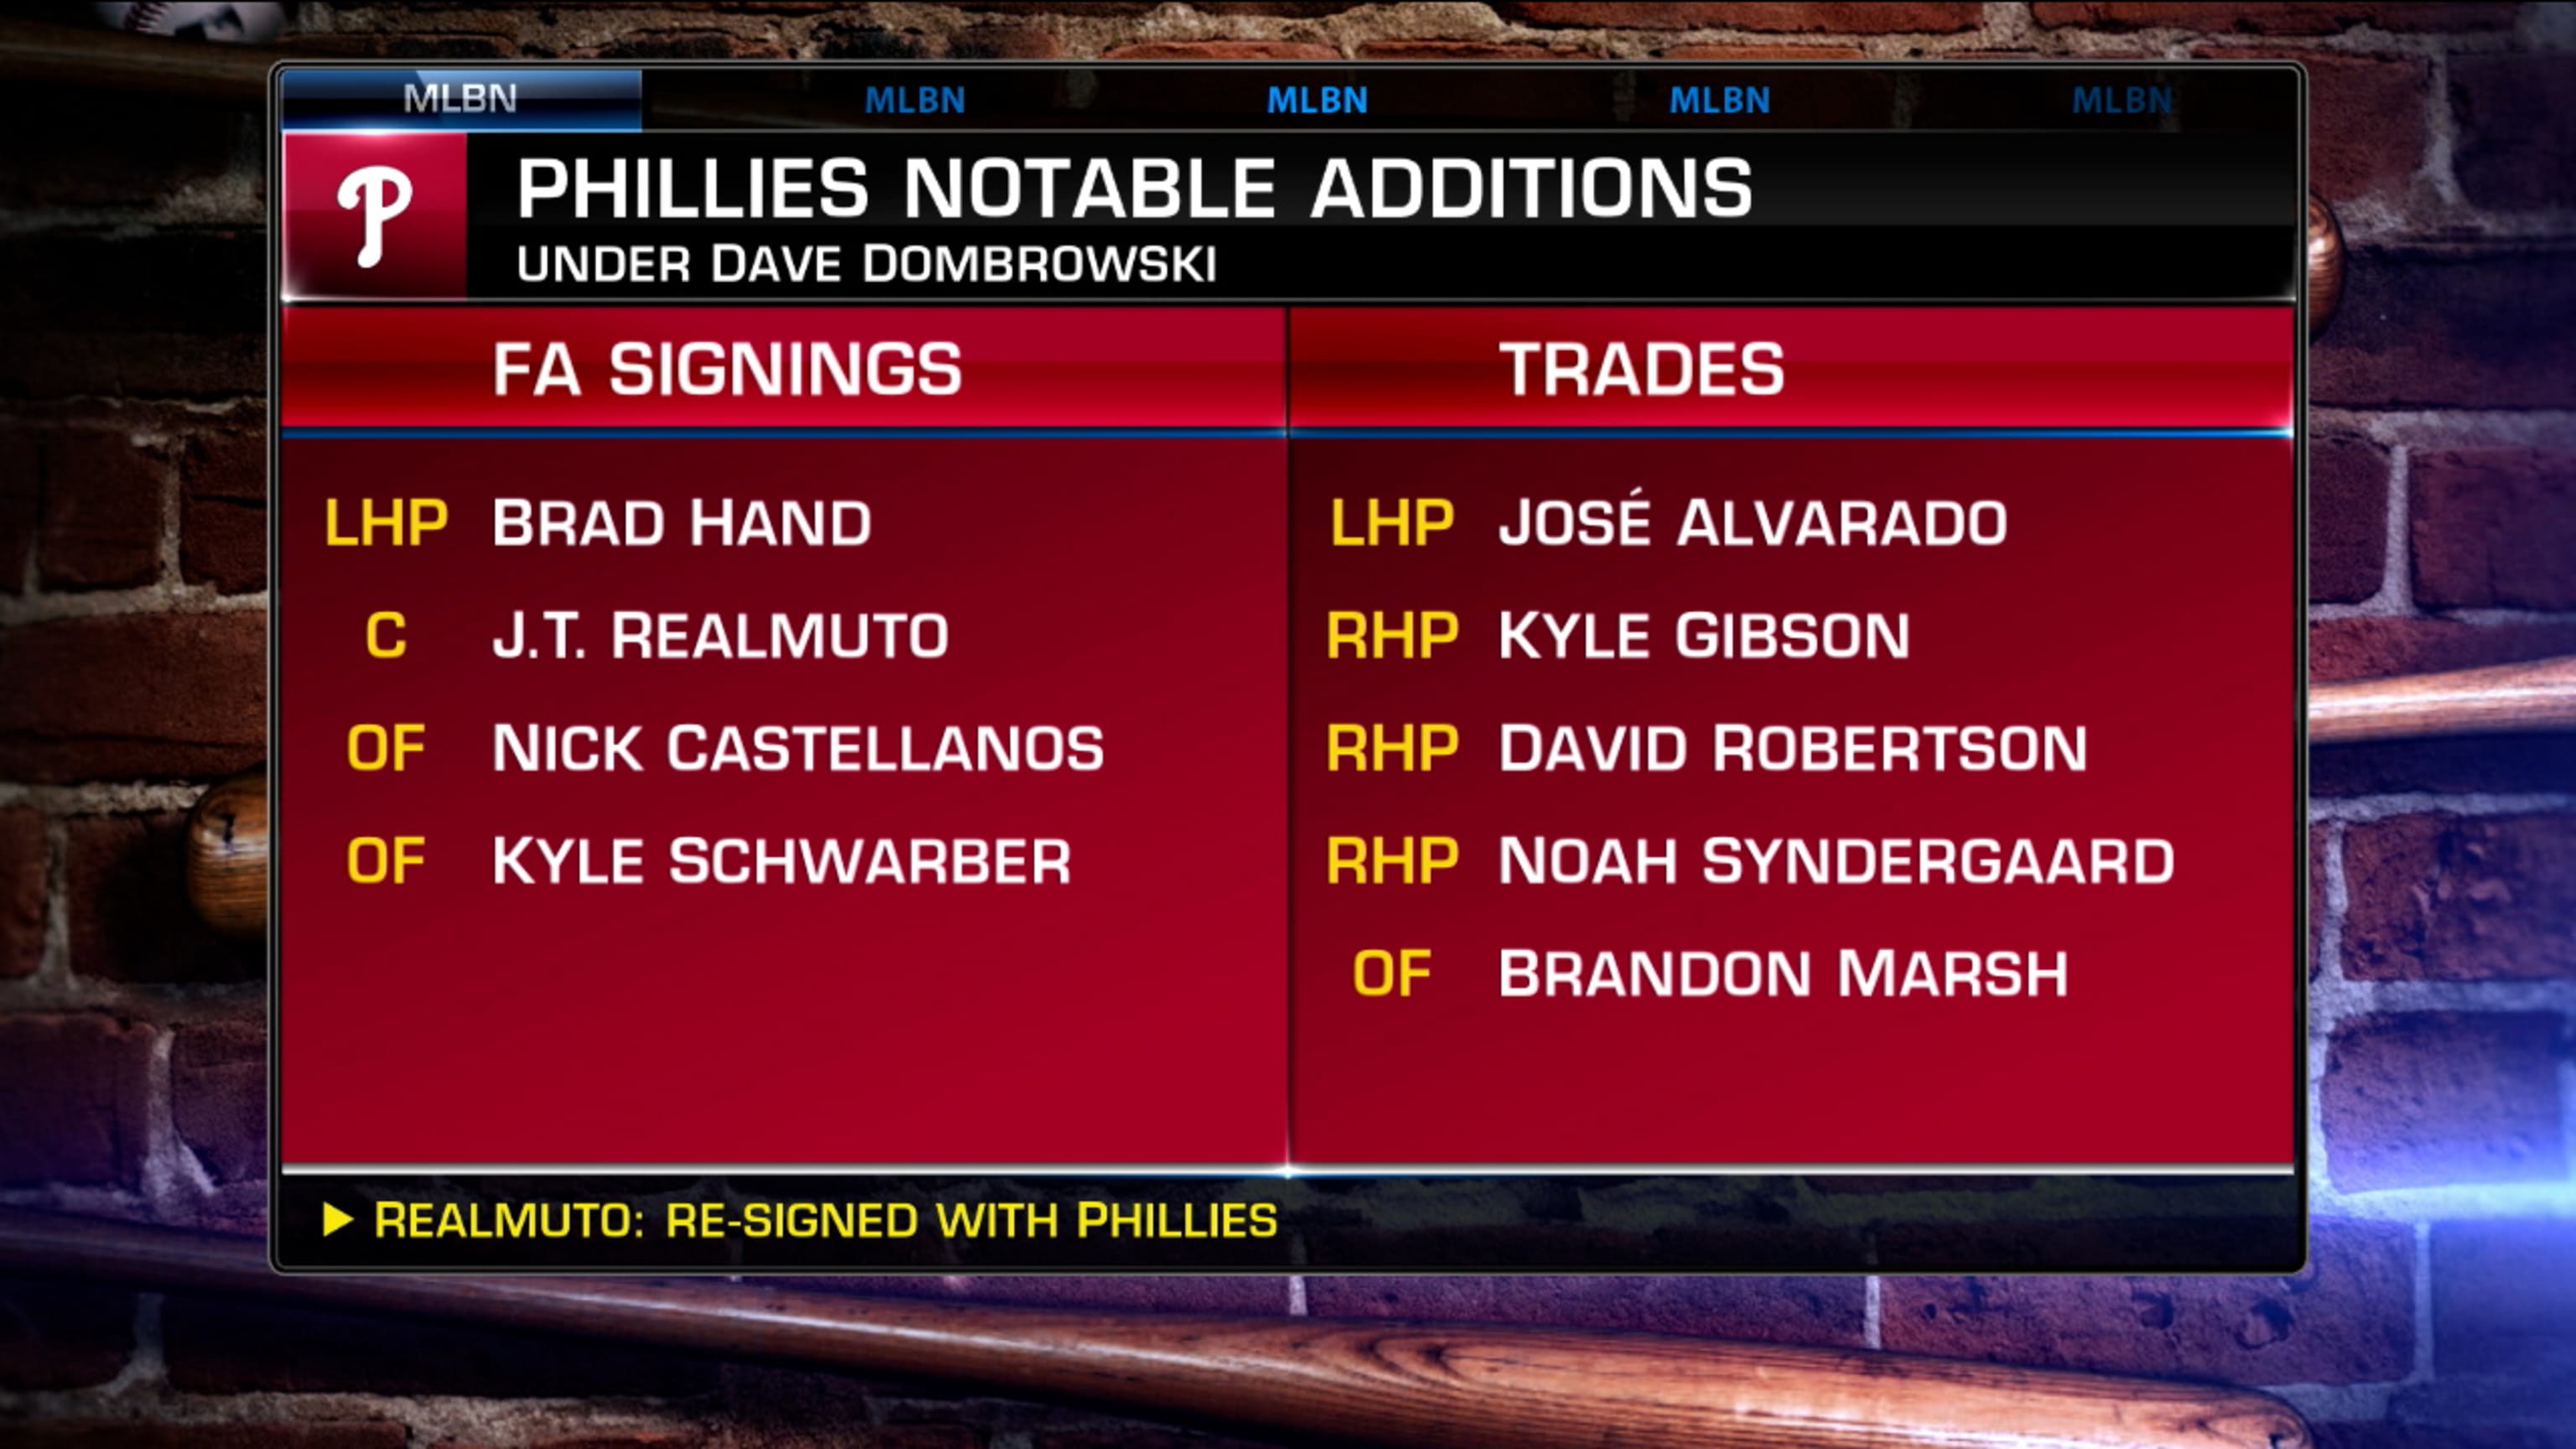 MLB Now on Dombrowski's moves